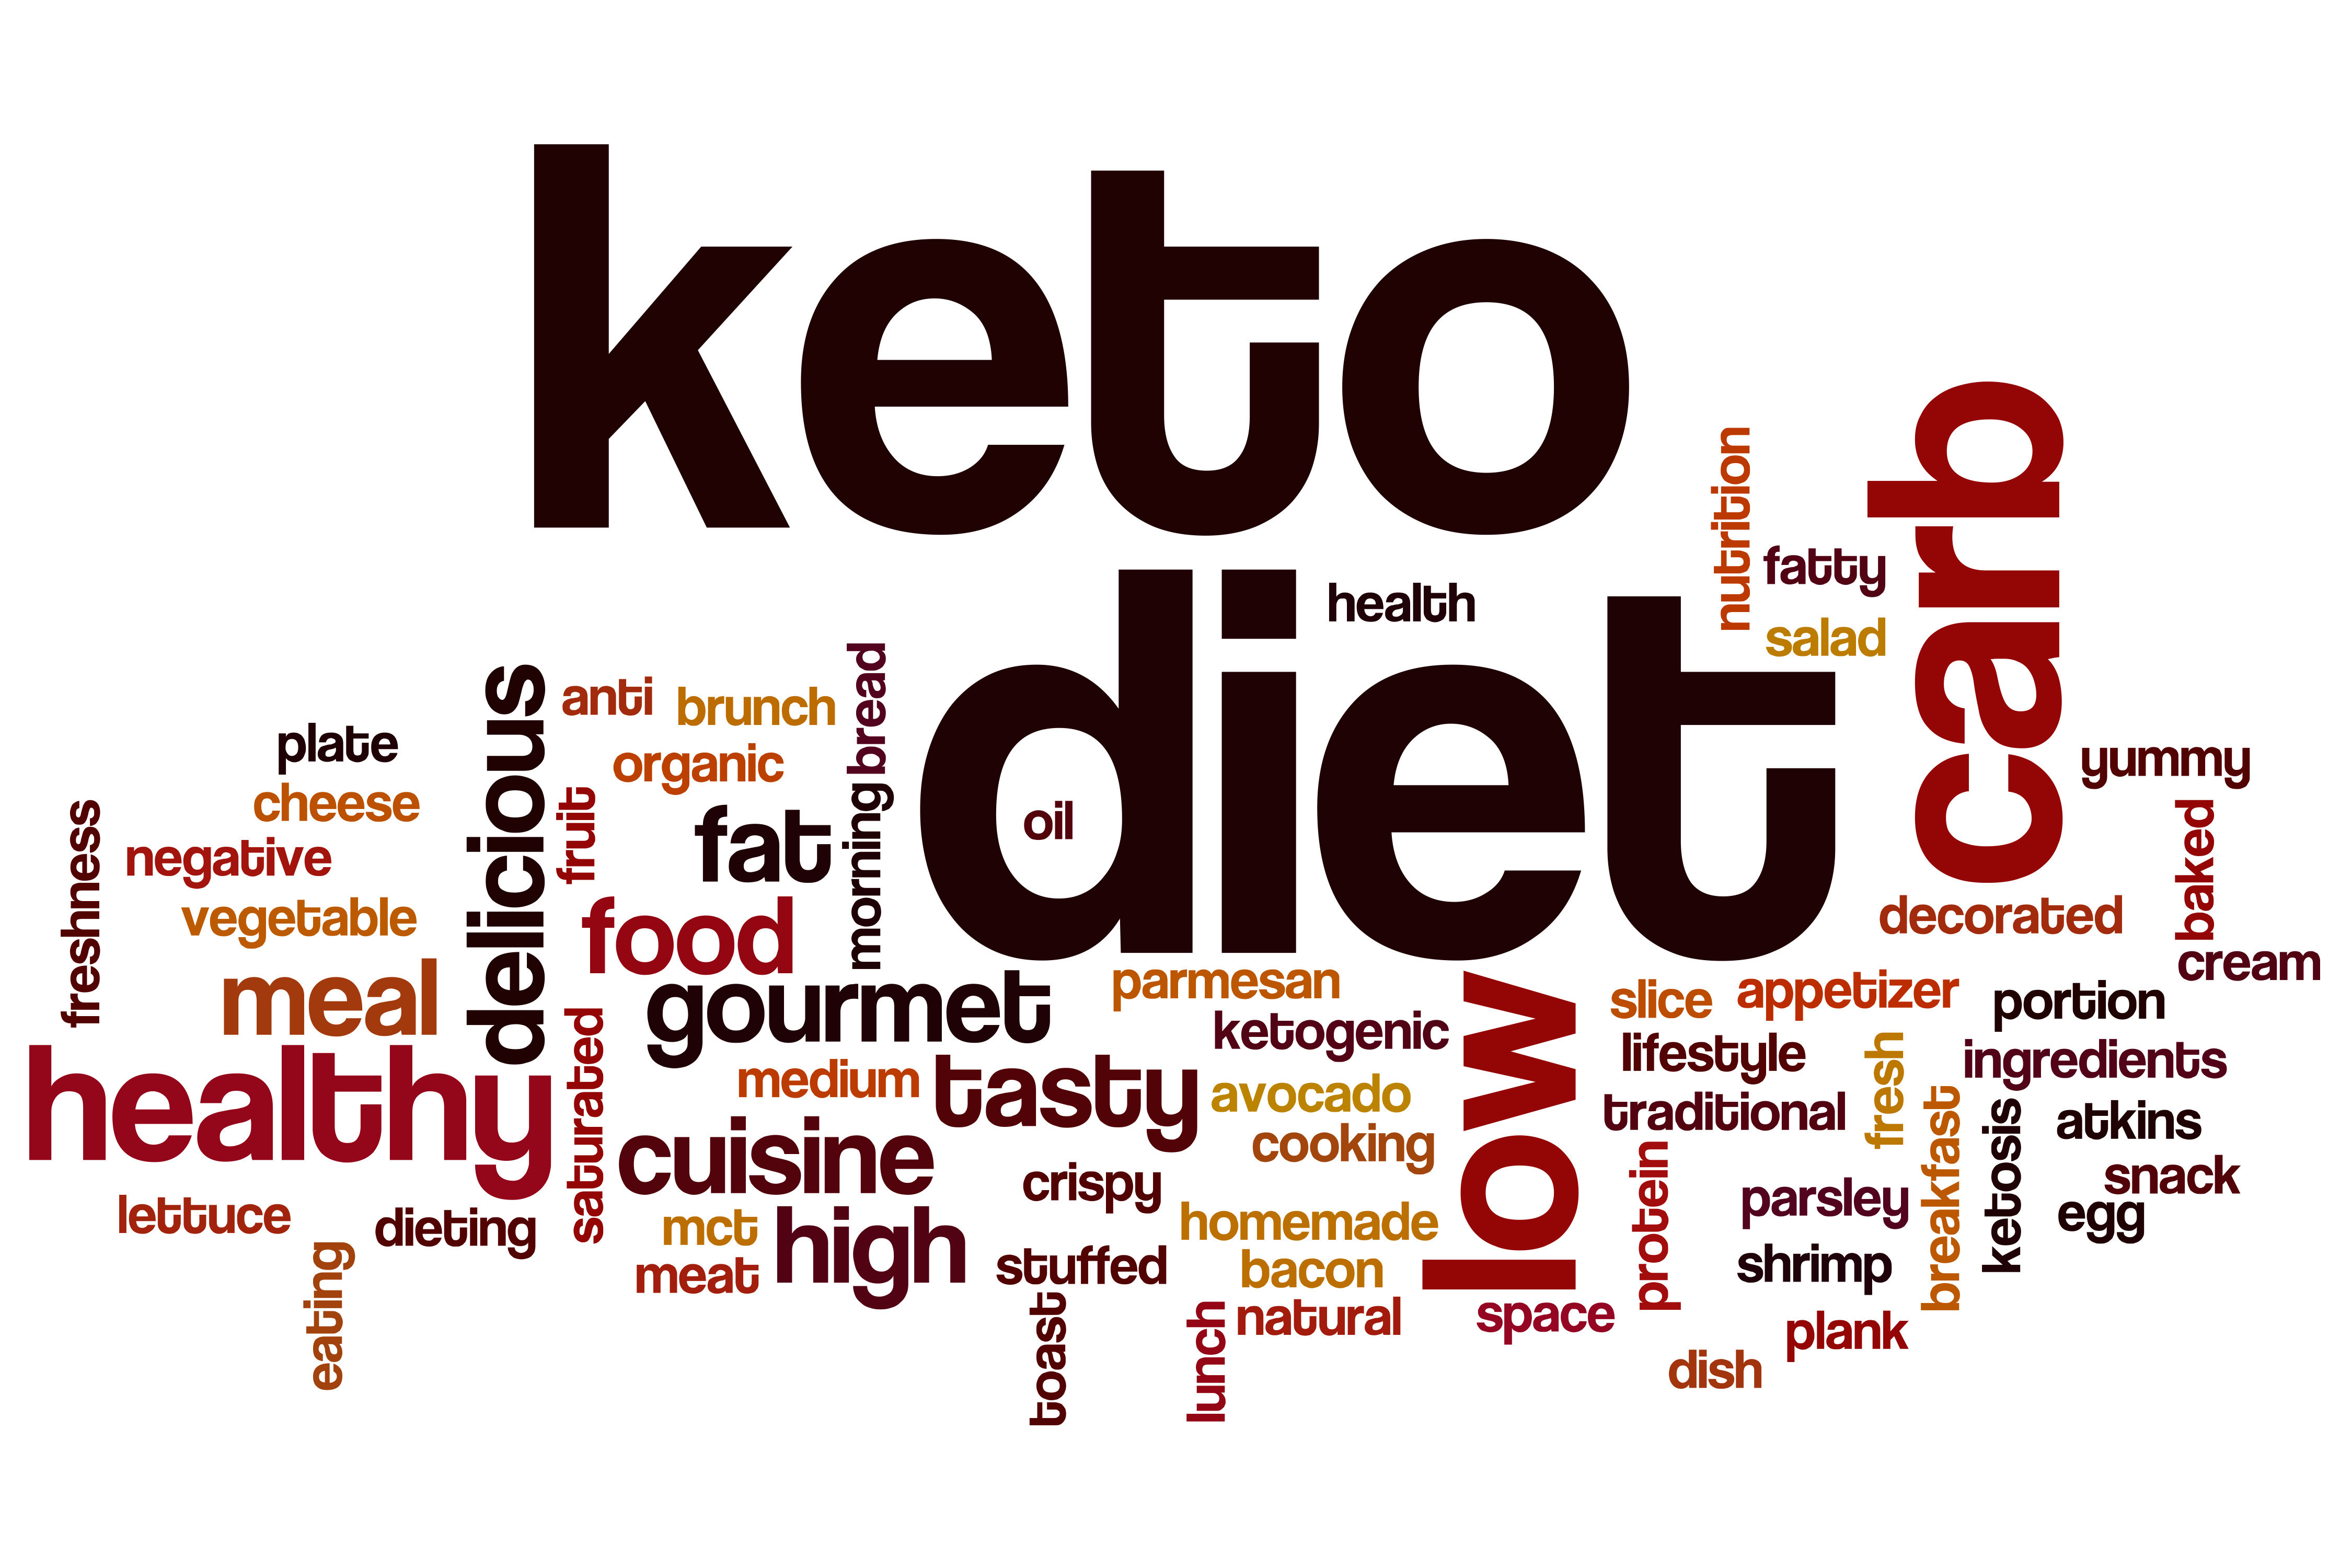 Keto Diet News
 Ketogenic Diets May Delay Aging